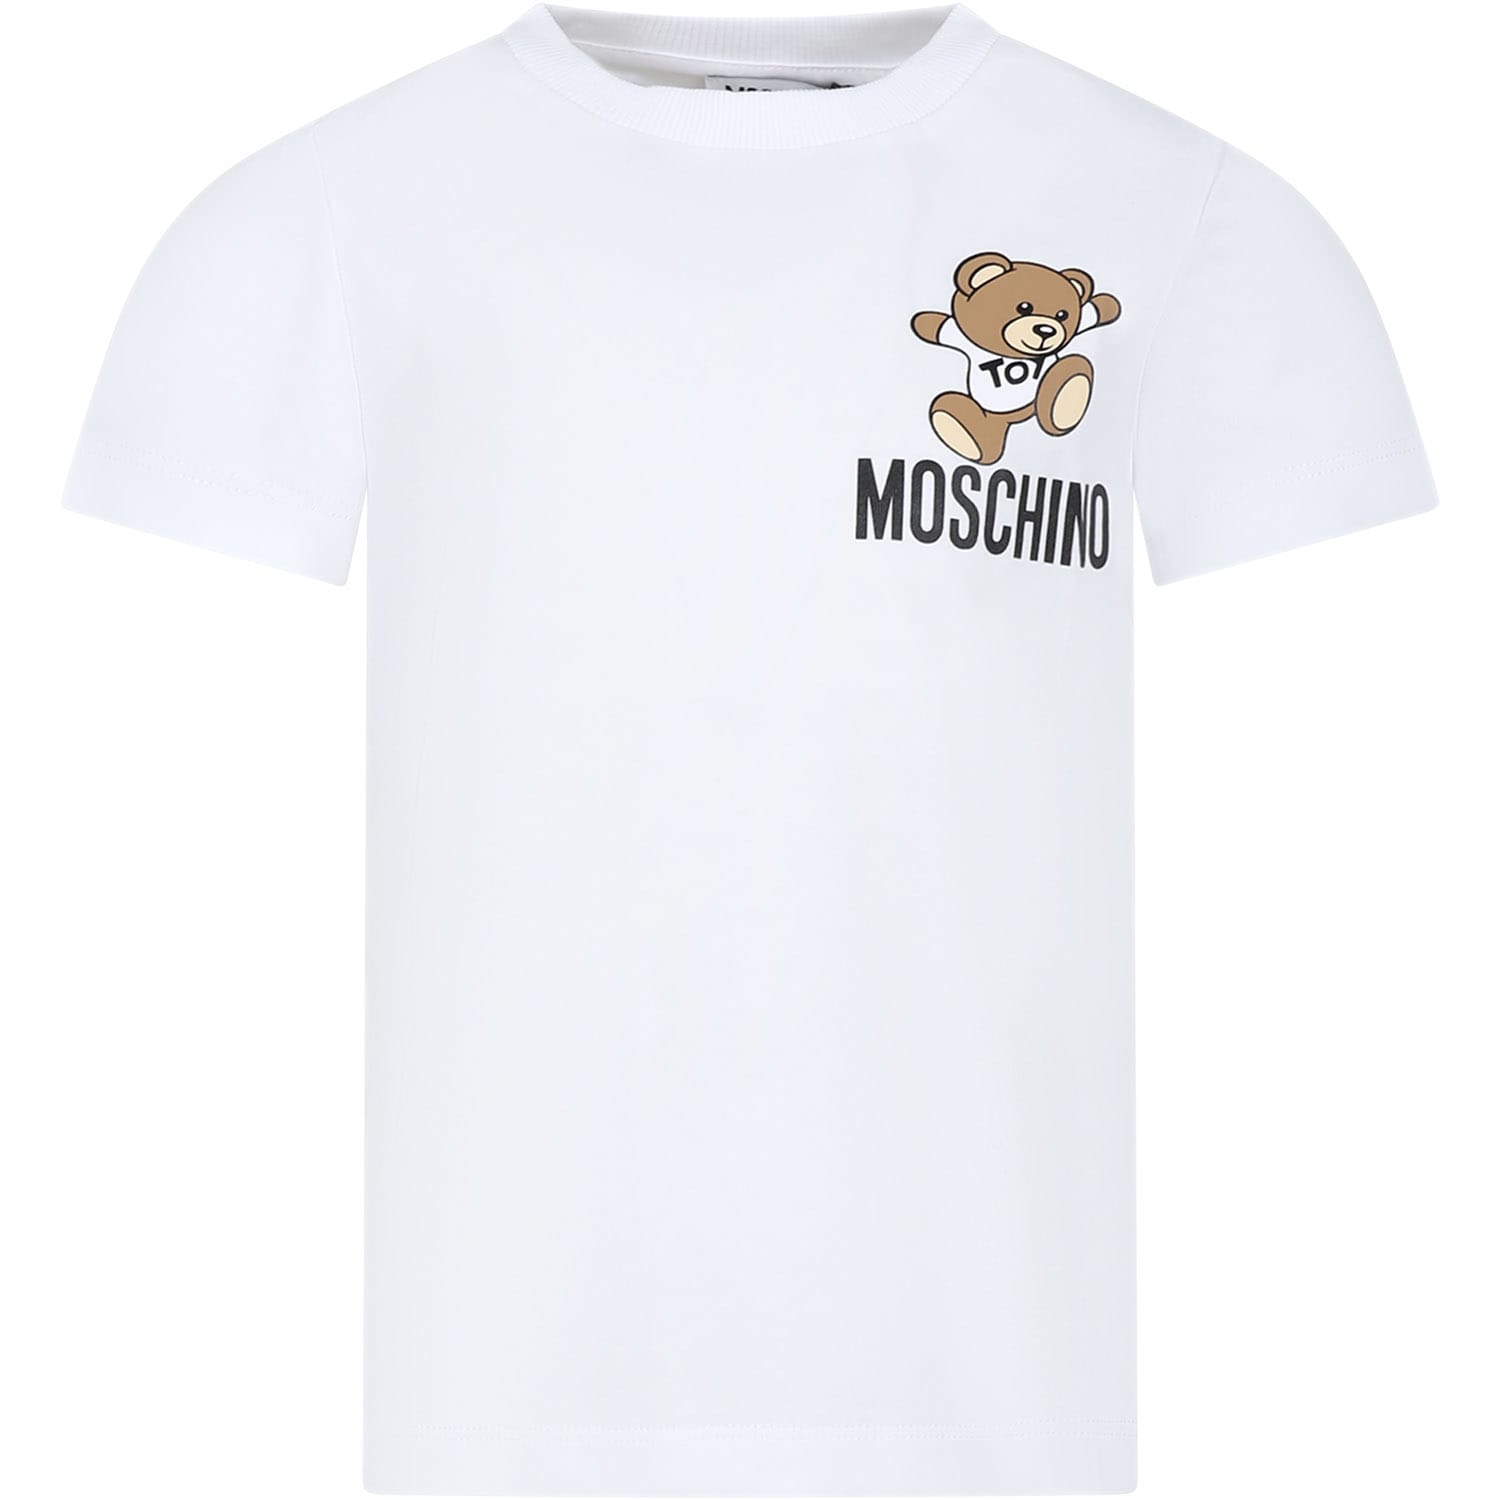 Moschino White T-shirt For Kids With Teddy Bear And Logo